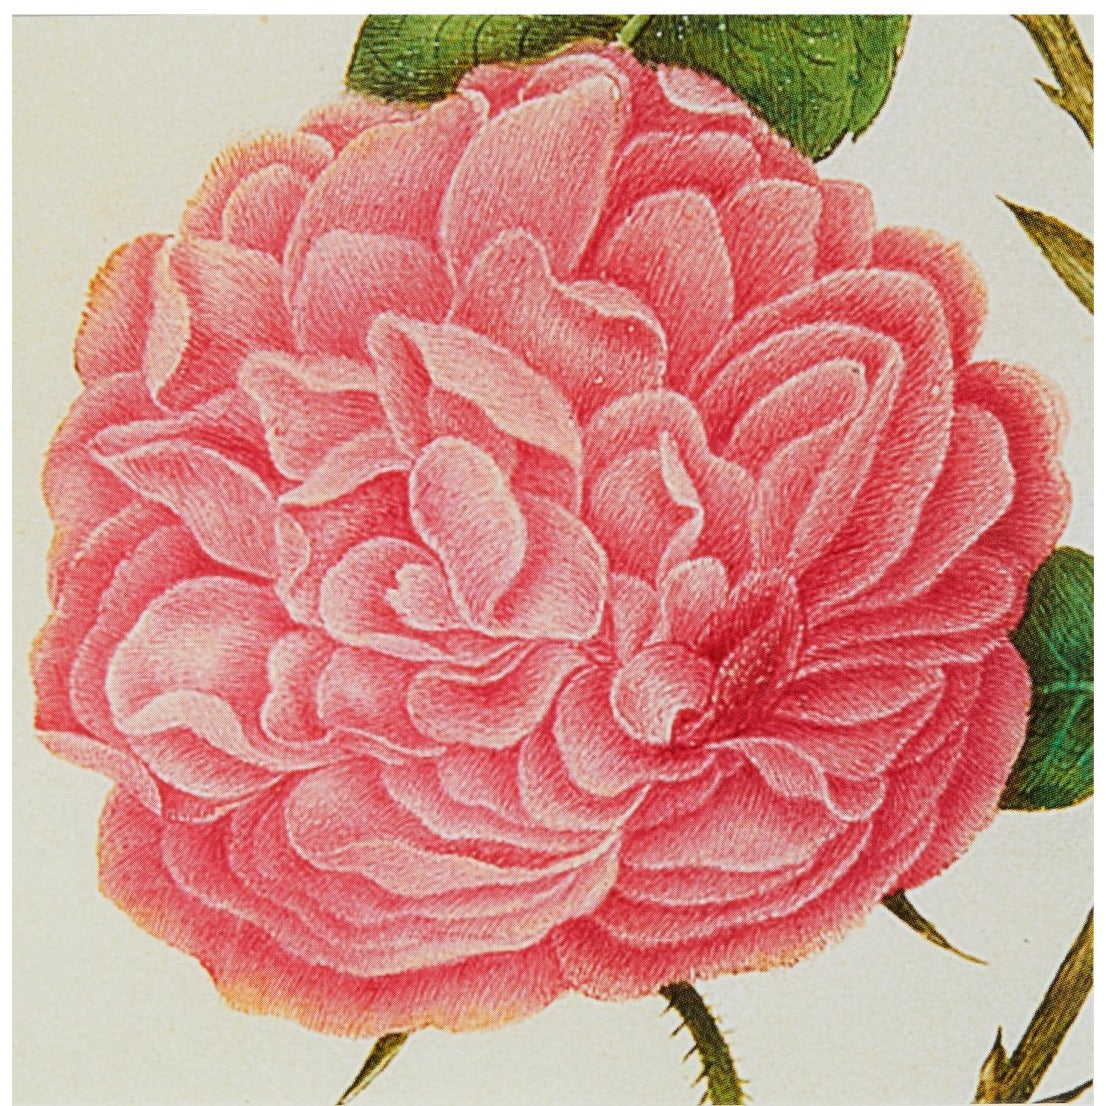 Notecard - Centifolia rose. From the Broughton Collection of the Fitzwilliam Museum, brought to you by CuratingCambridge.co.uk